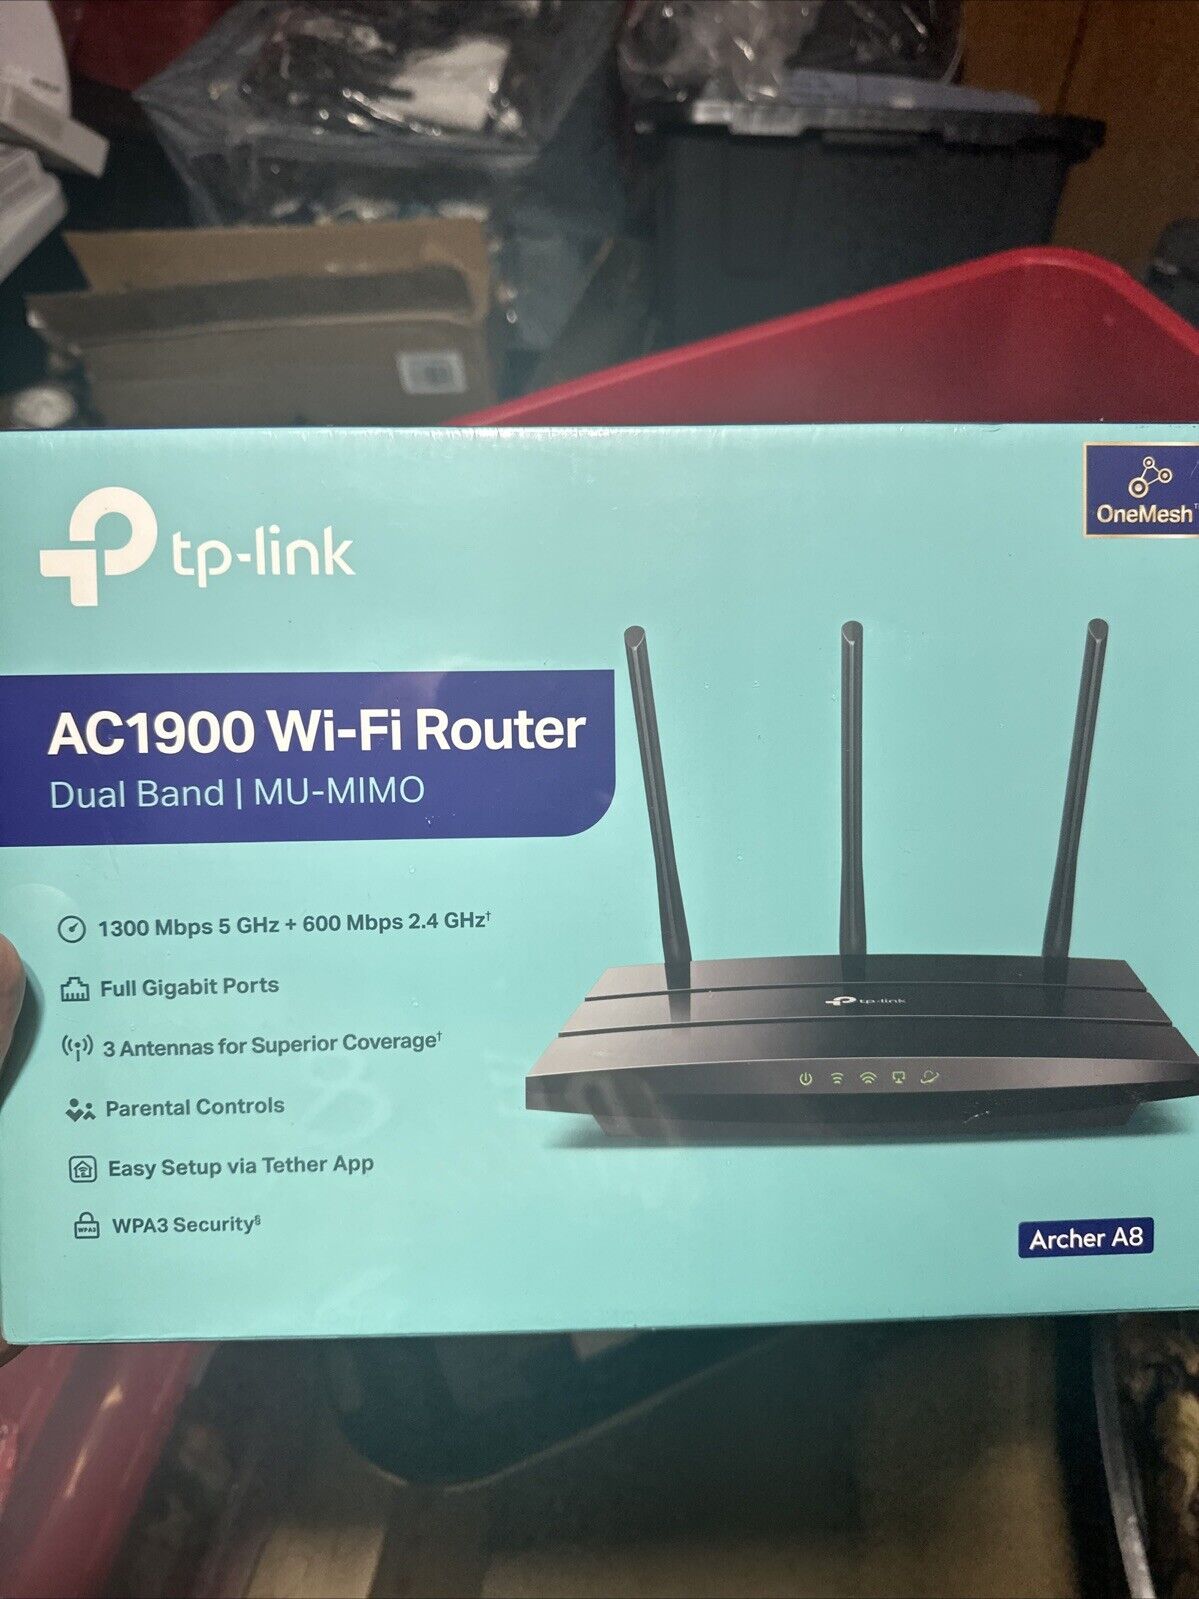 TP-LINK AC1900 Archer A8 Wi-Fi Router Dual Band 1300 Mbps - BRAND NEW SEALED